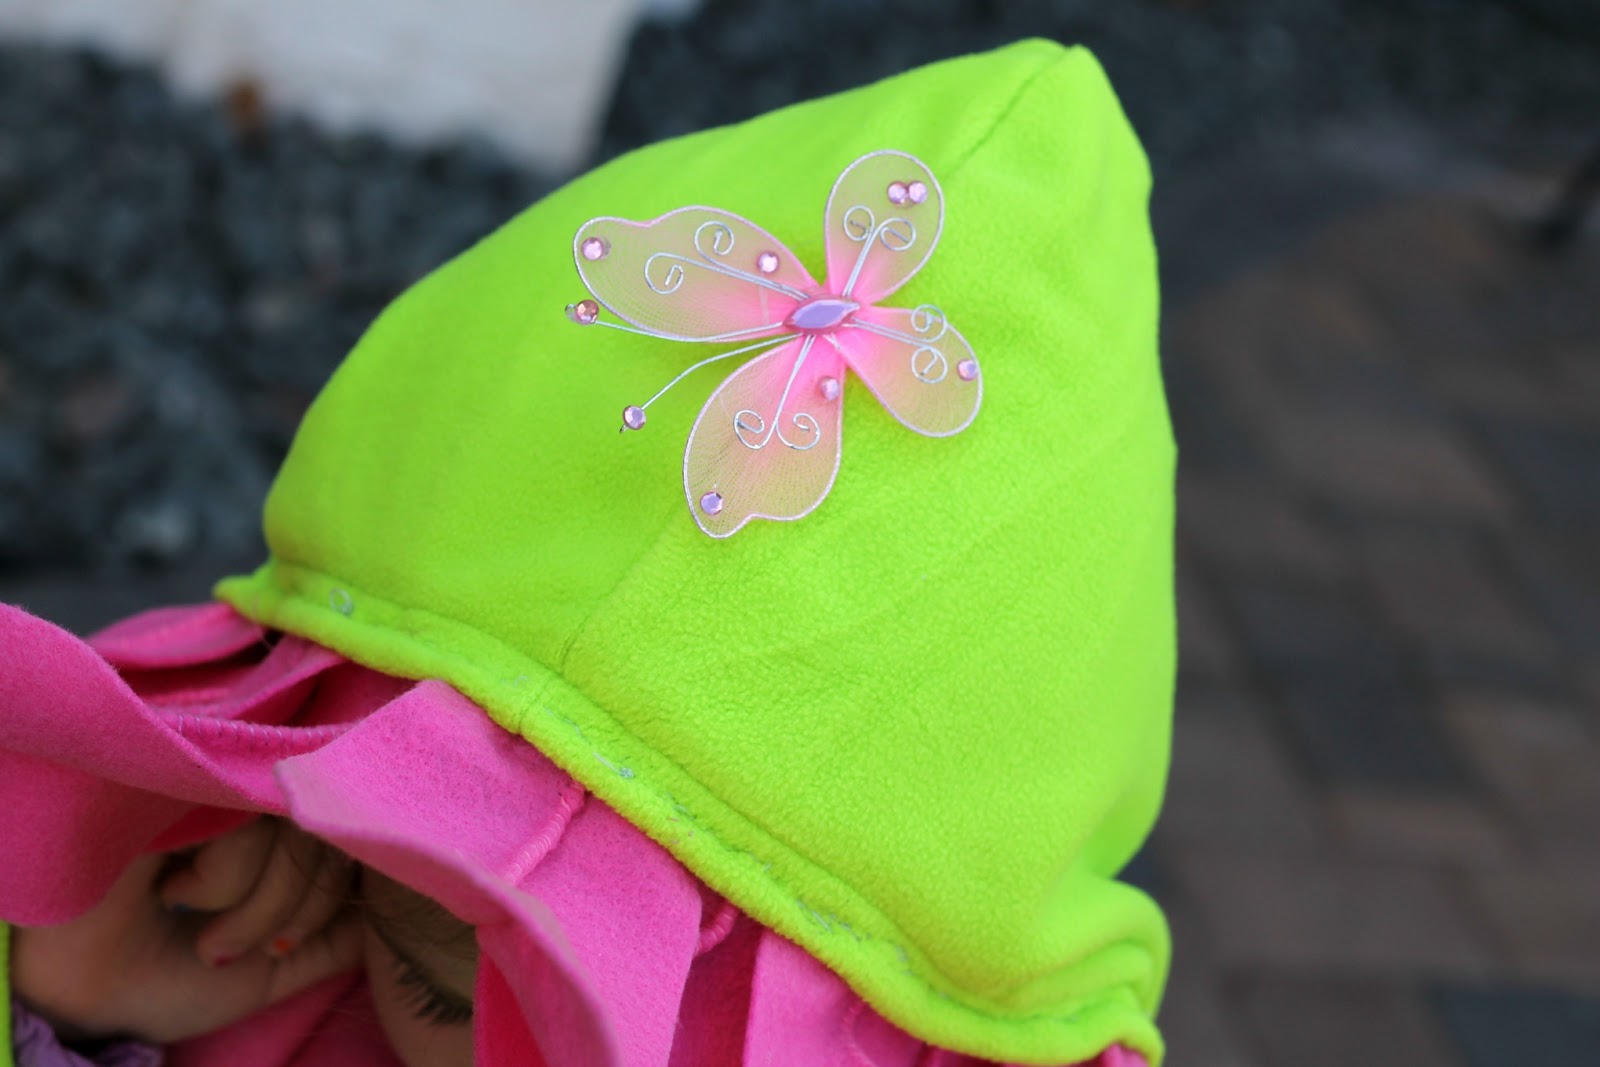 Make an easy (and warm!) flower costume for Halloween from a sweatshirt and felt.